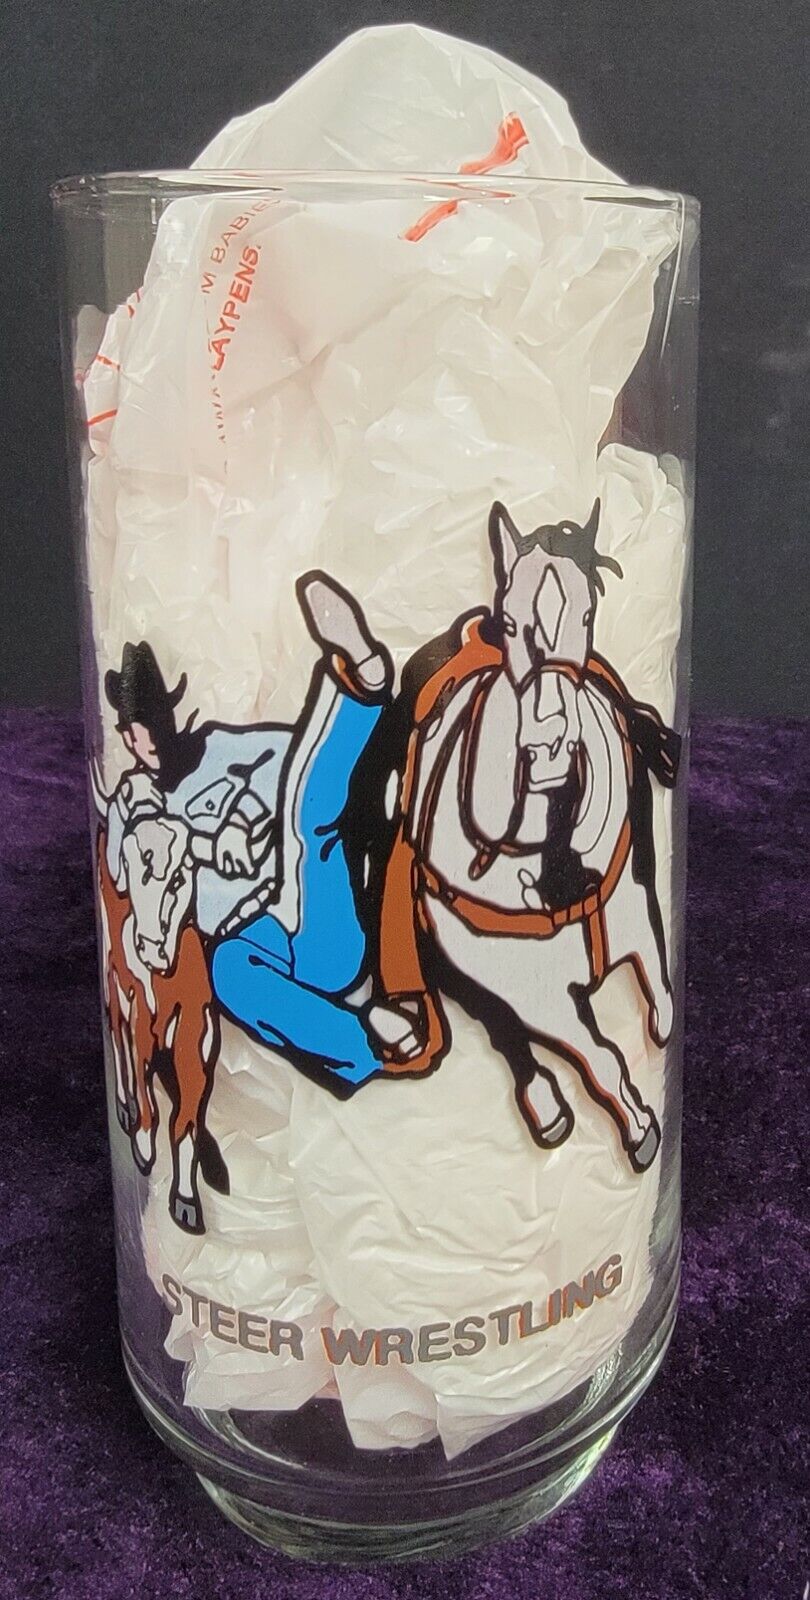 1979 World Championship PRCA National Finals Rodeo Glass (Steer Wrestling)